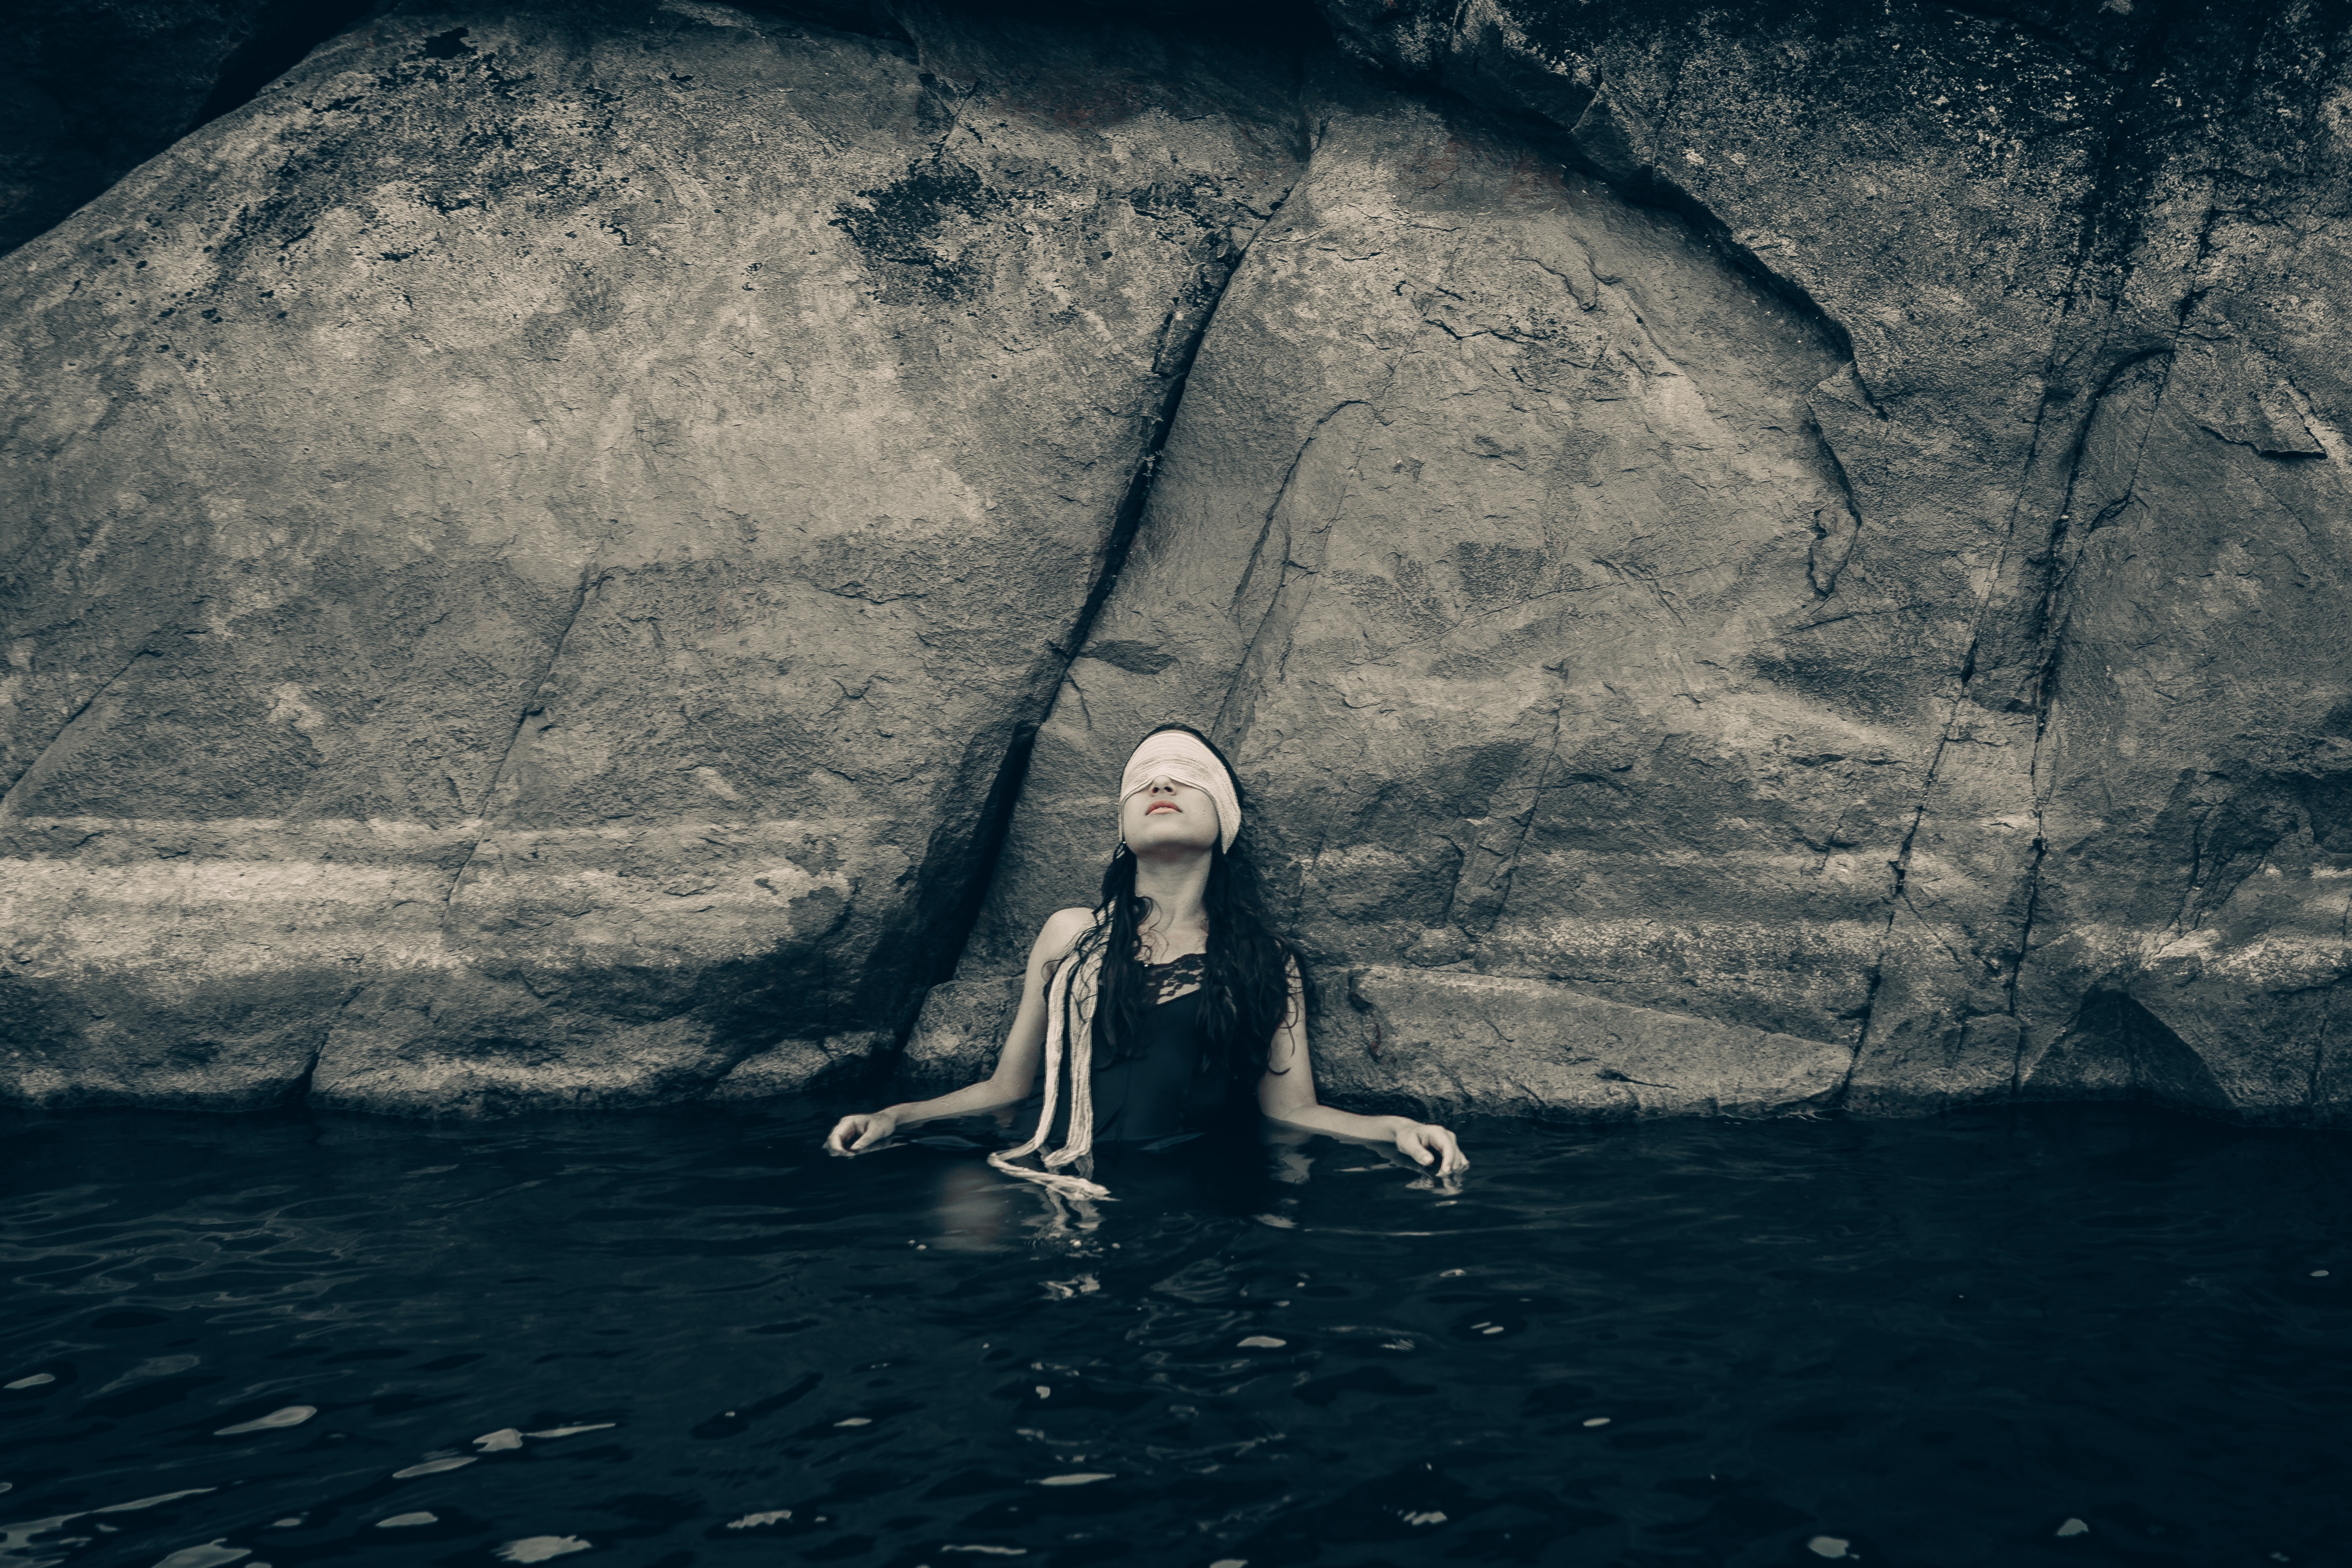 Woman in Blindfold Wearing Black Top on Body of Water While Leaning on a Rock, Ocean, Water, Travel, Seashore, HQ Photo